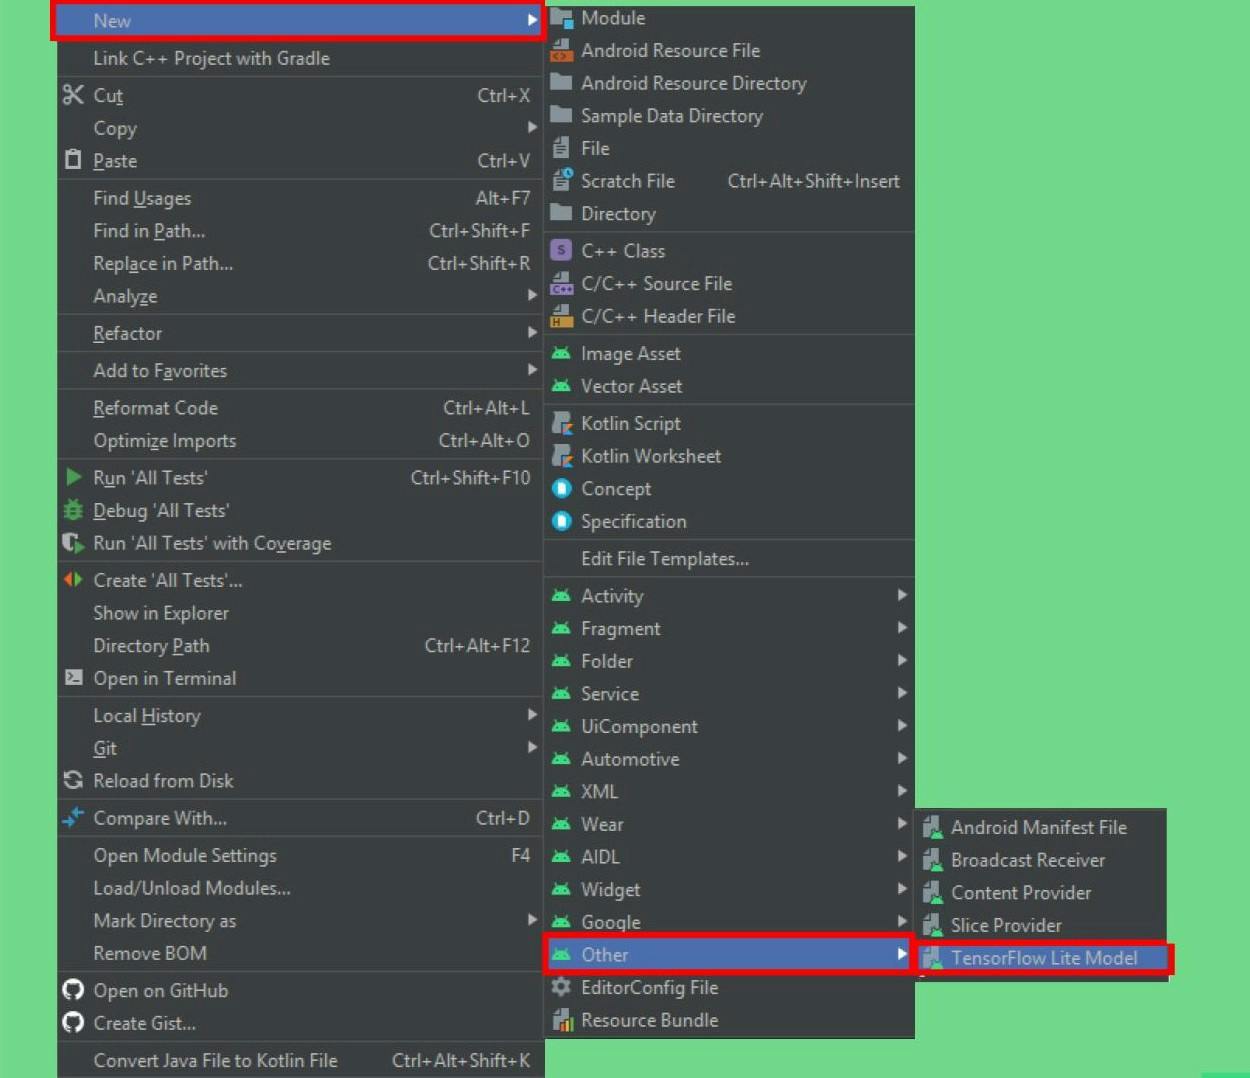 The import model option in Android Studio